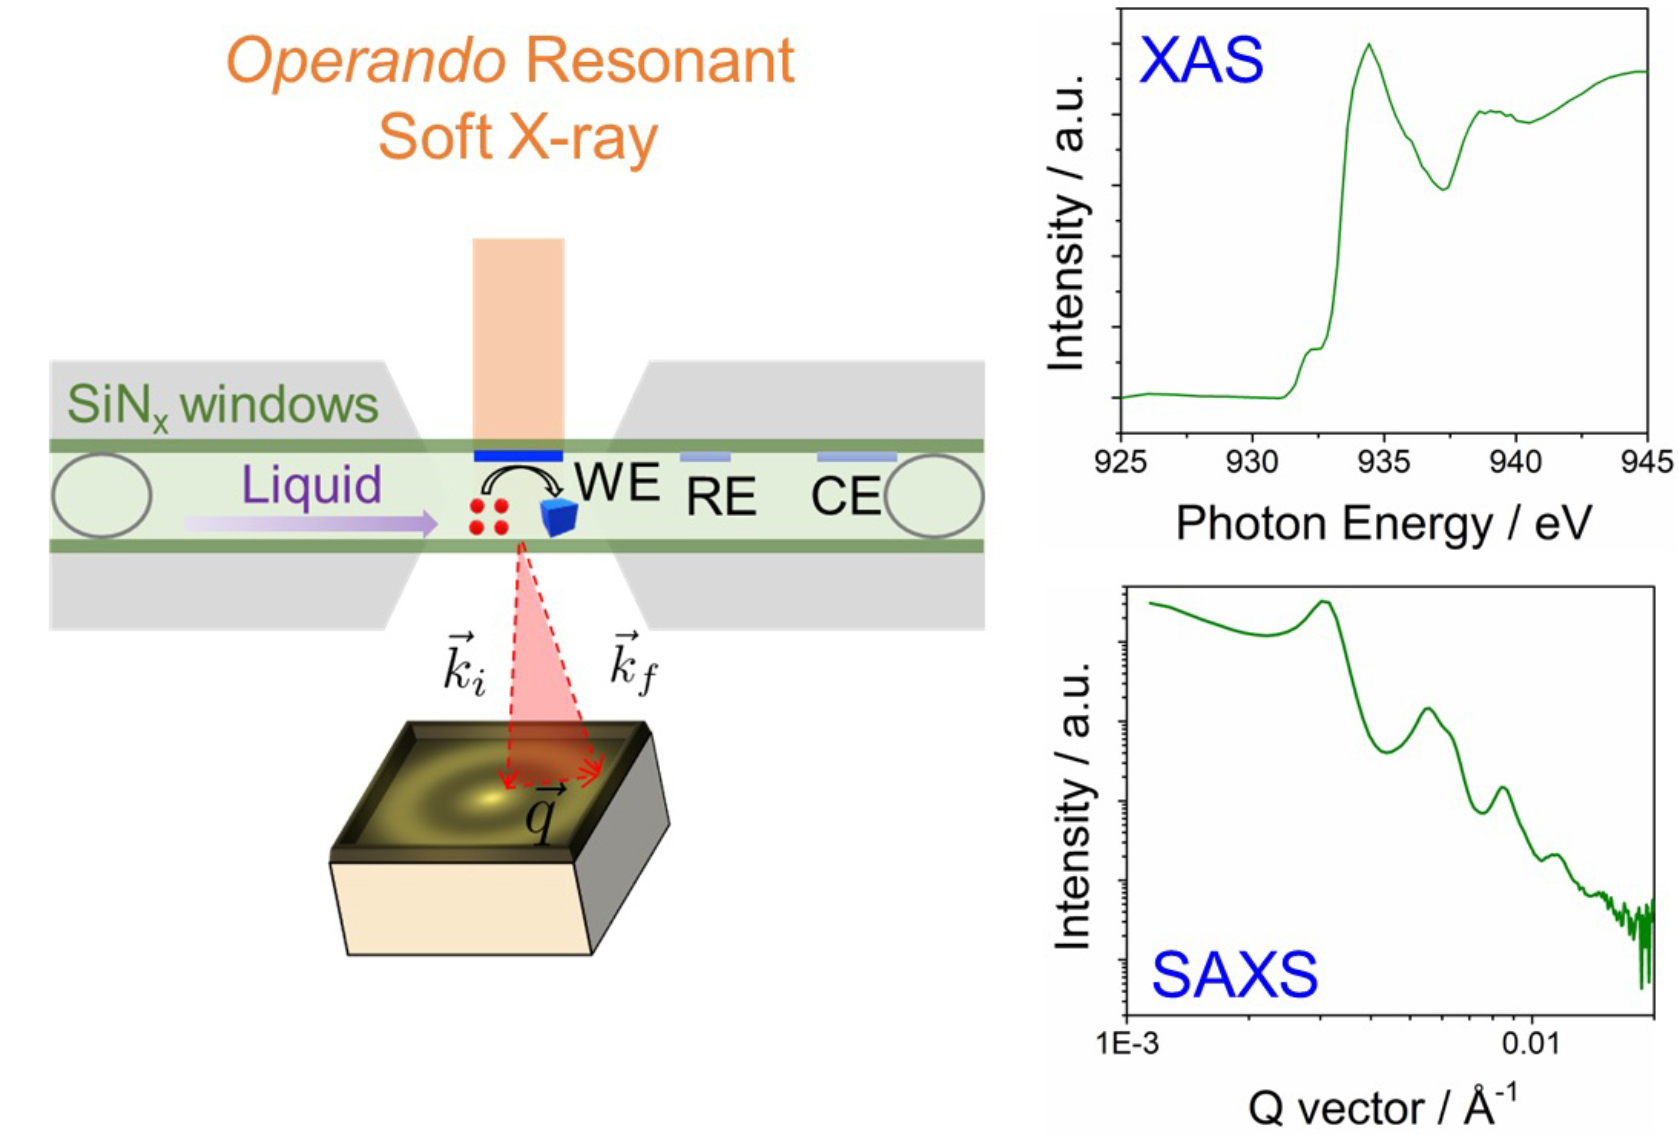 Schematic of experiment setup on left and two graphs of XAS and SAXS data on right.